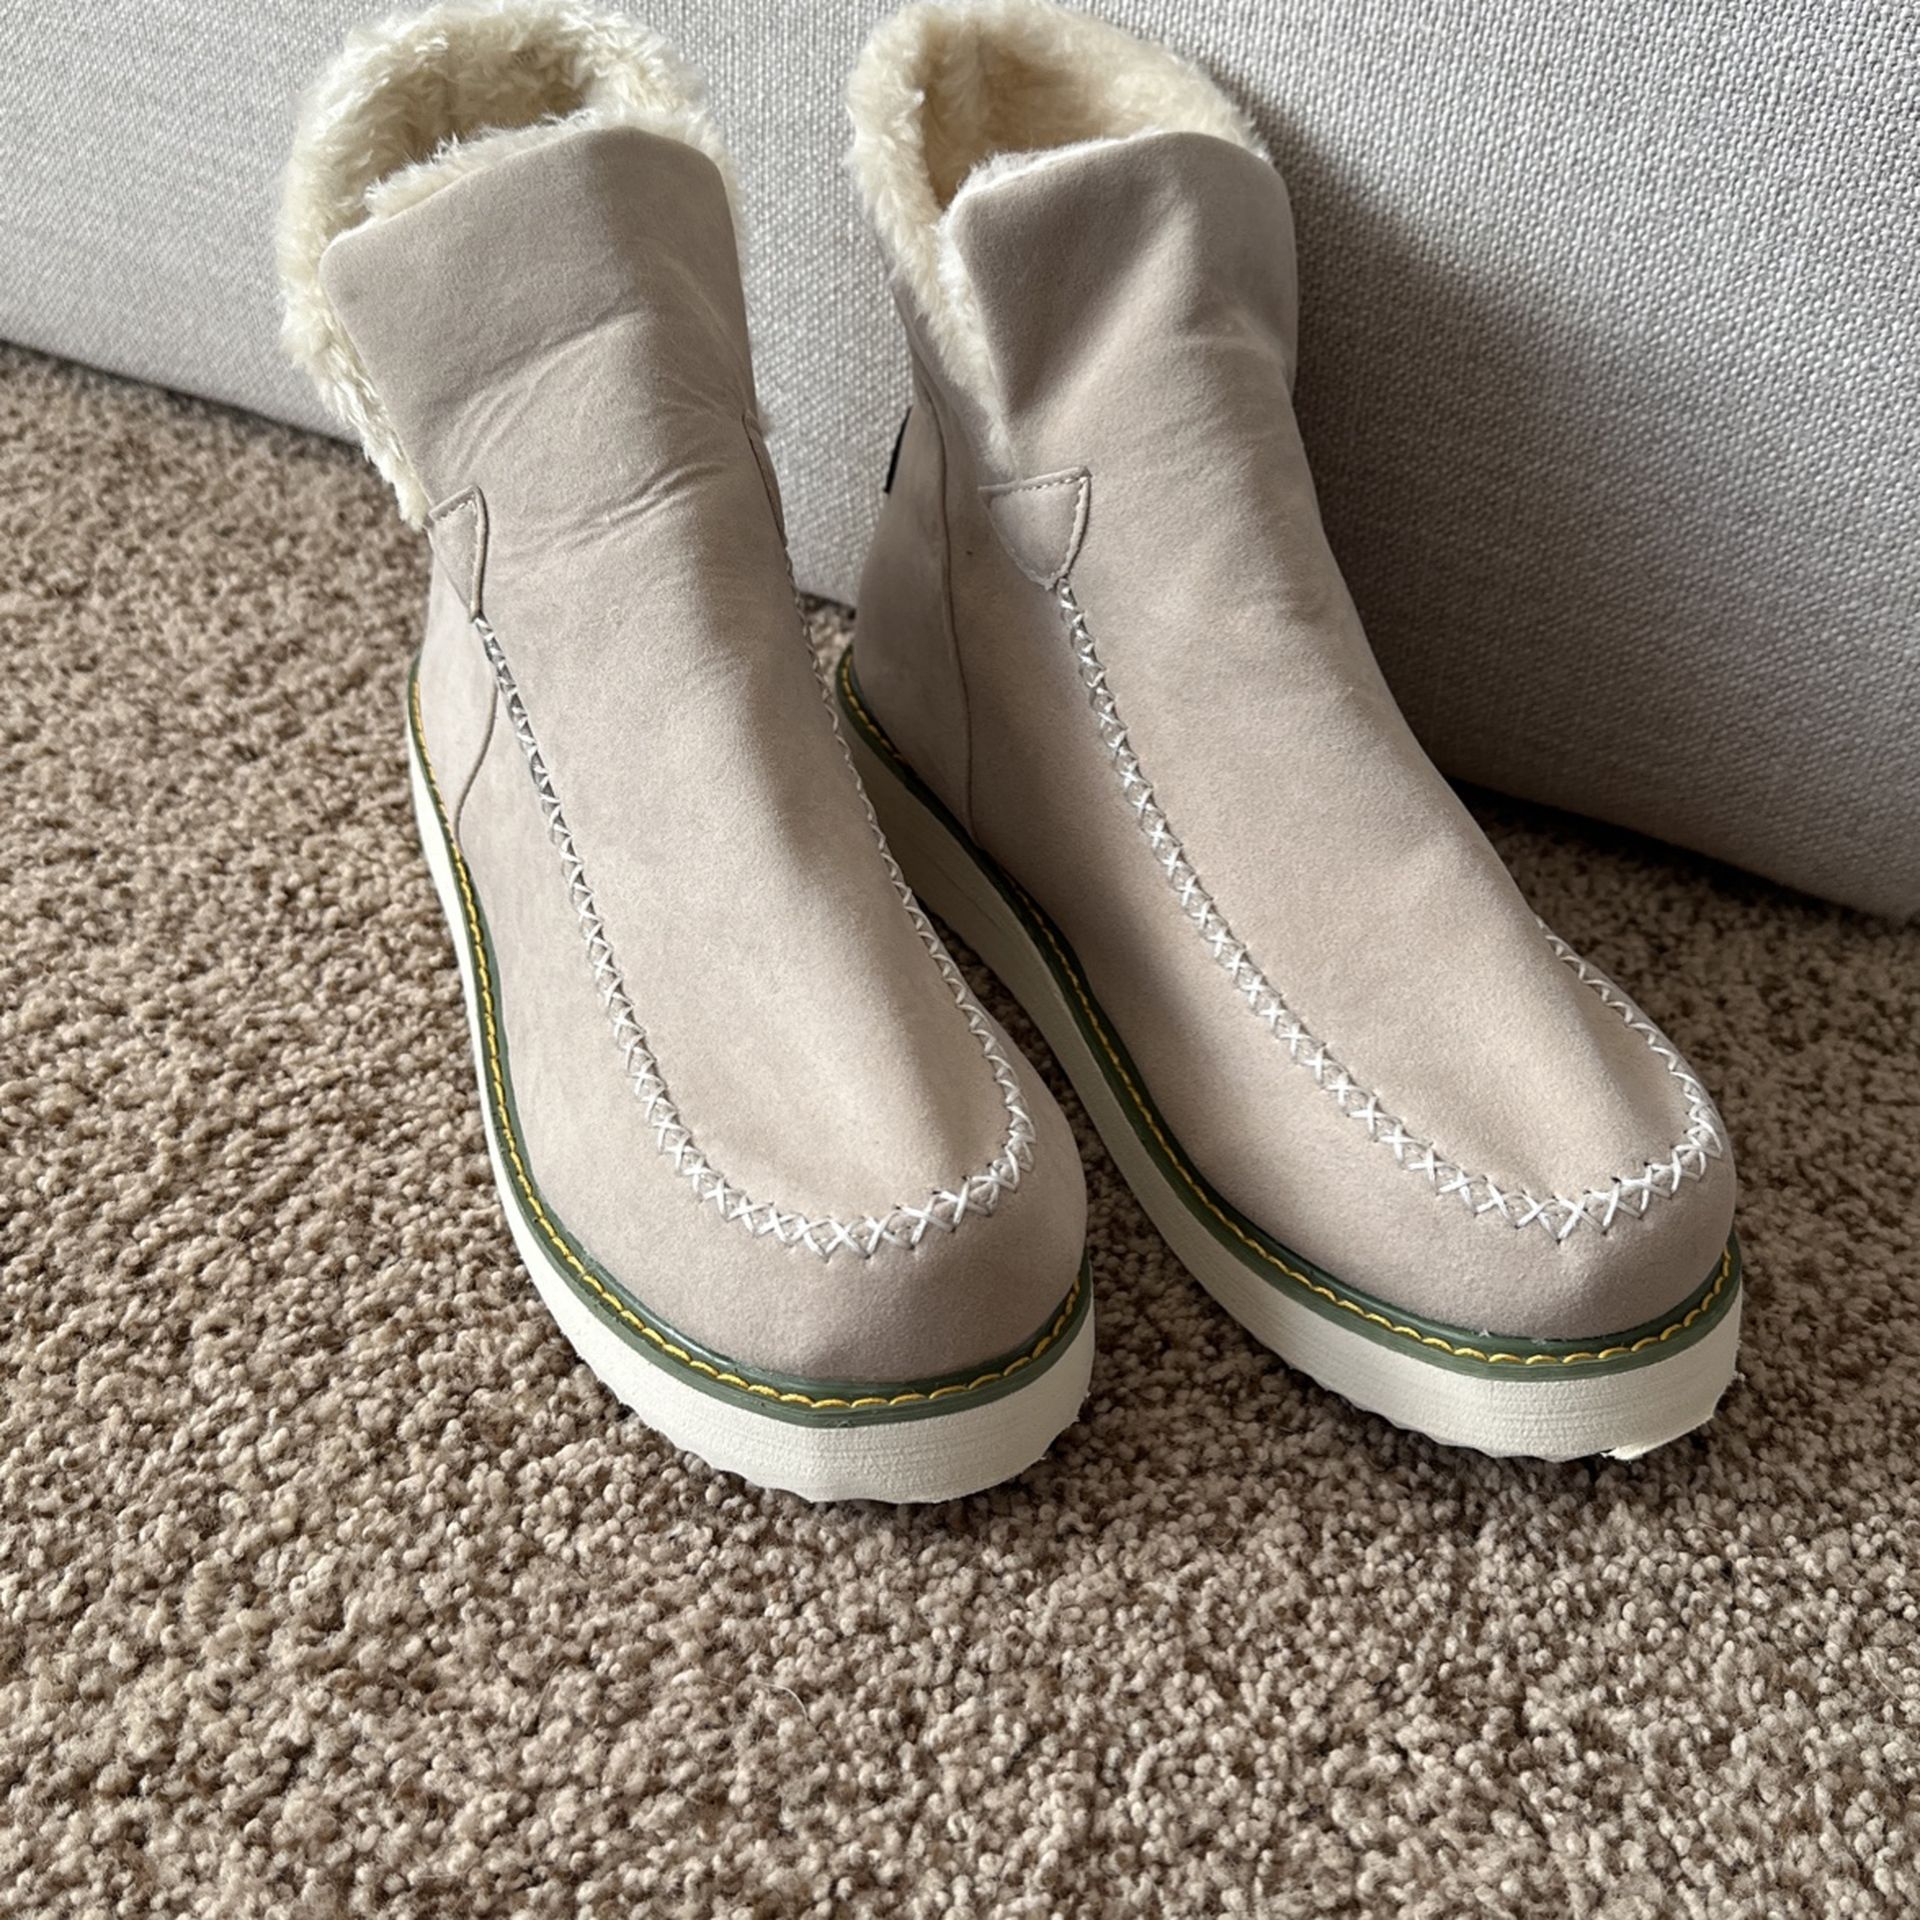 Women’s Ankle Snow Boots Size 9